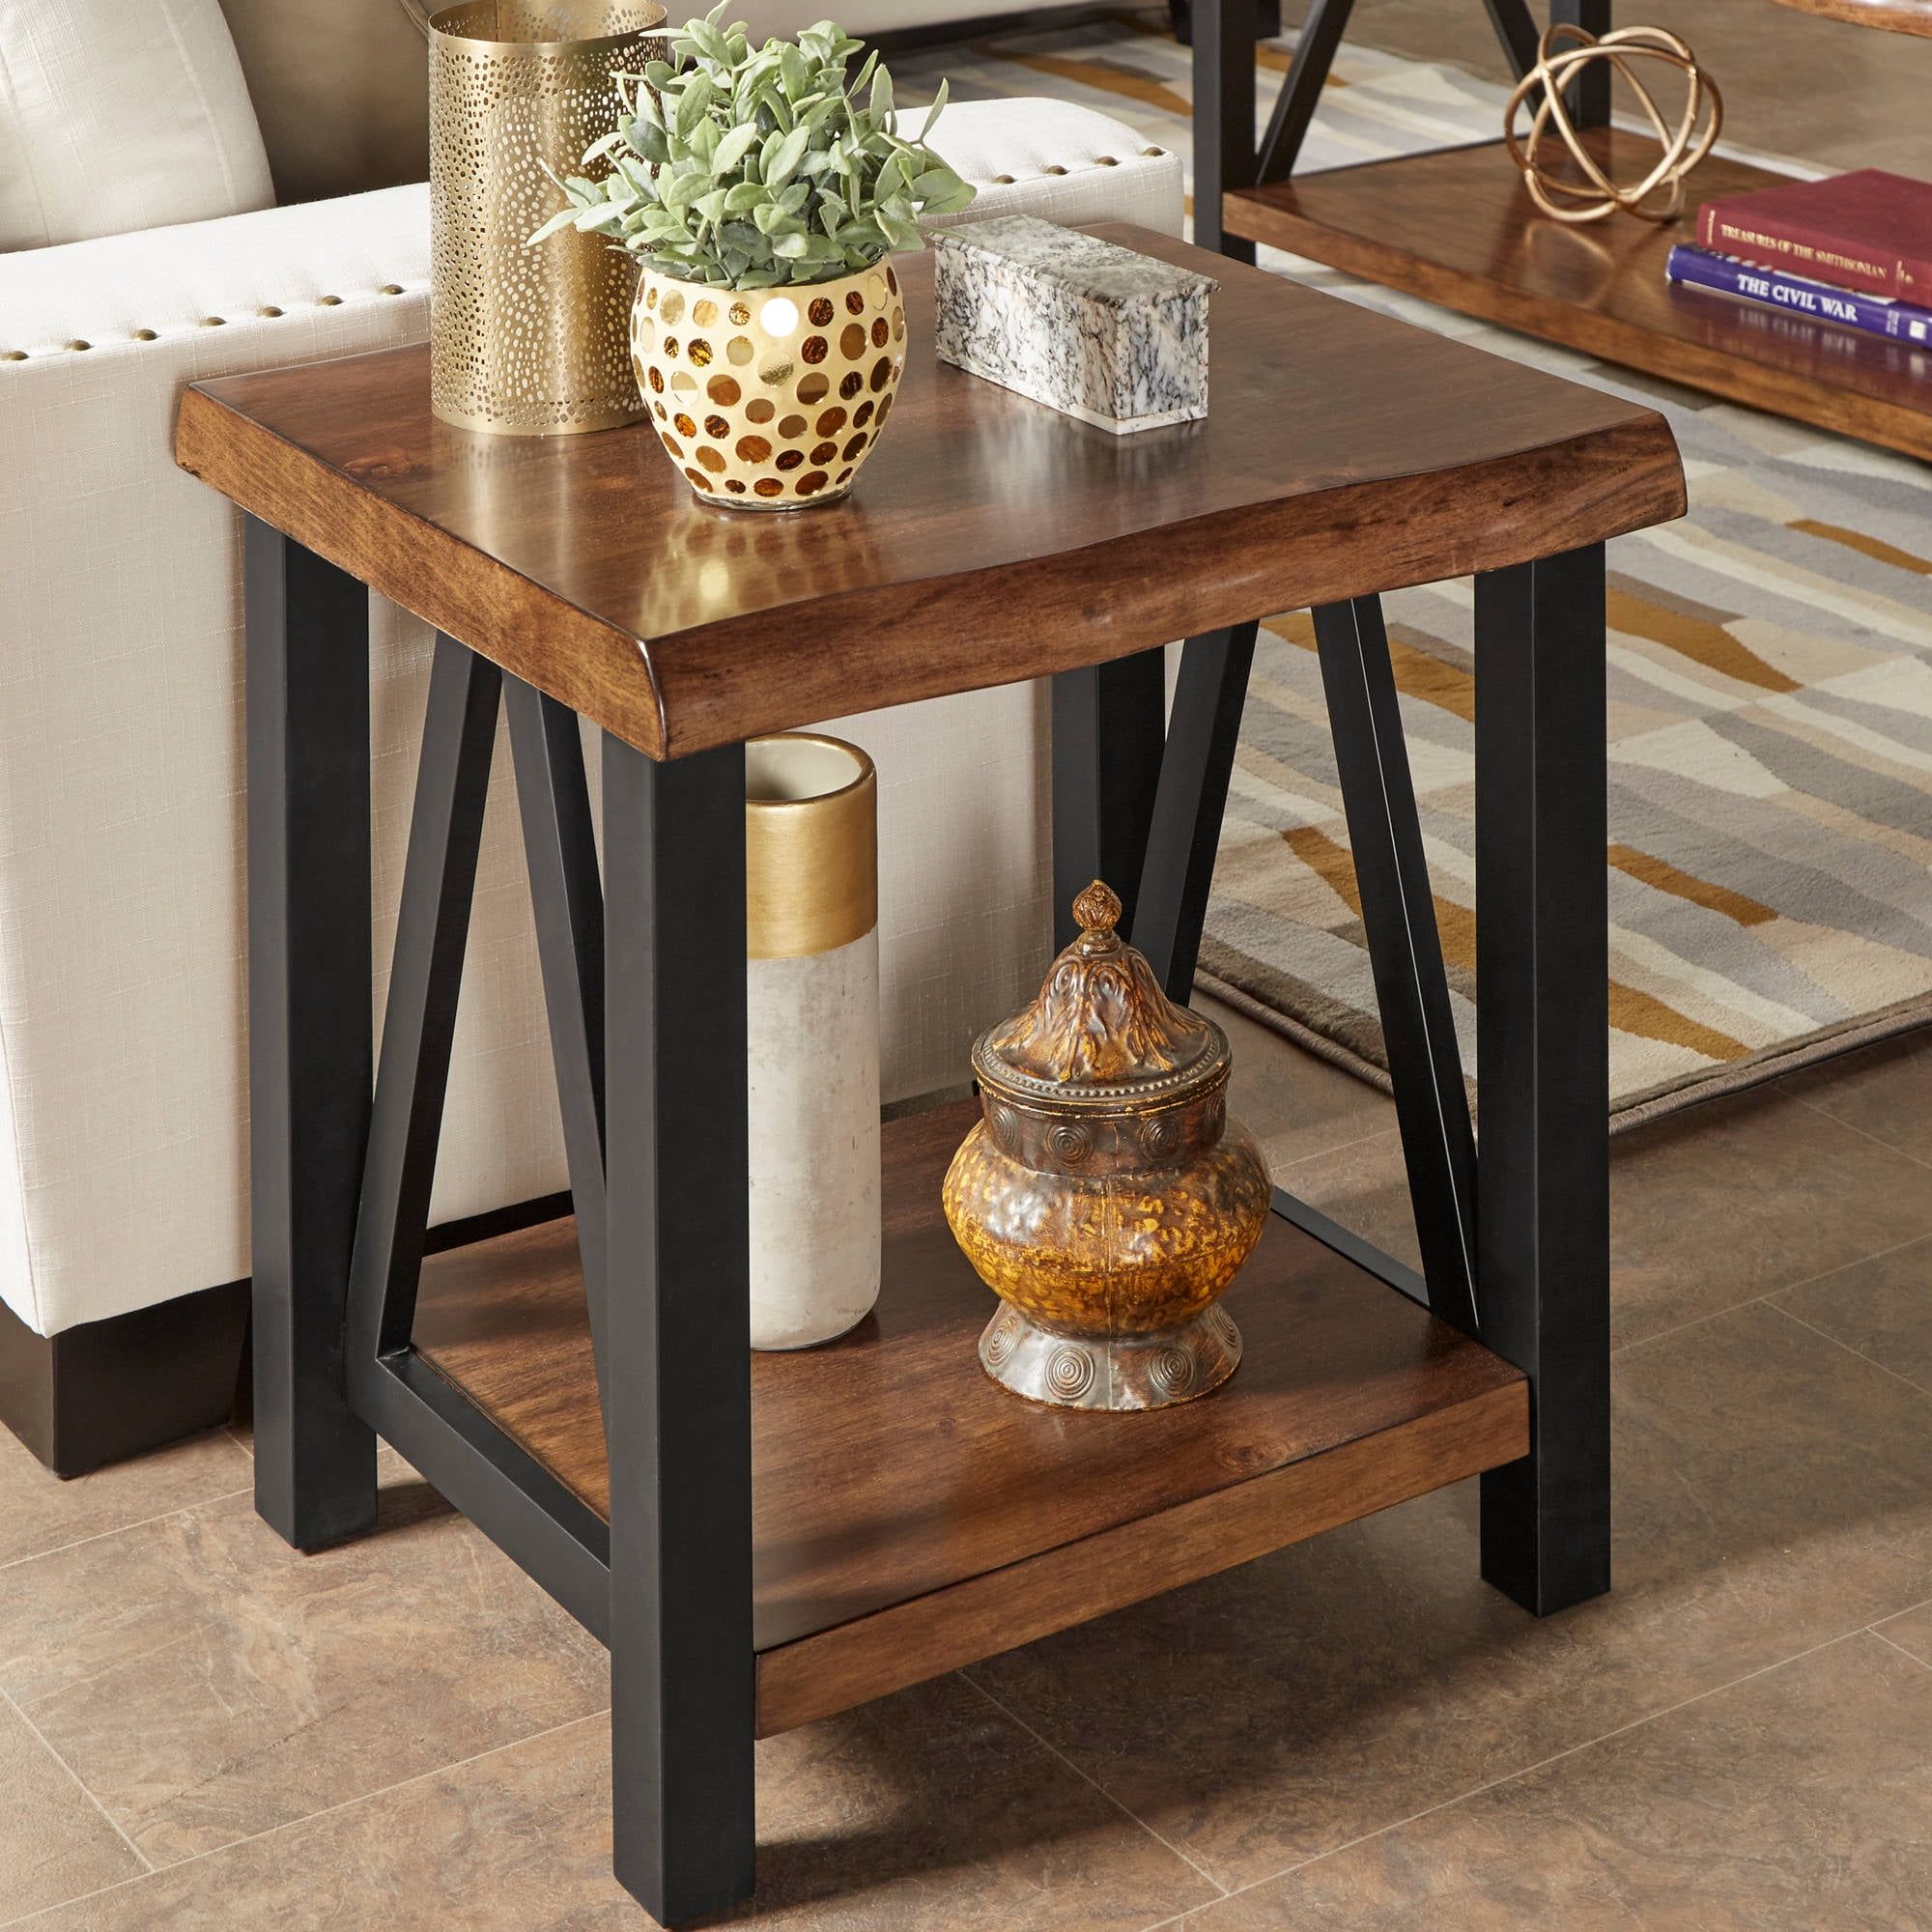 Weston Home Rustic Metal Base End Table With Natural Edge Table Top And Throughout Metal Side Tables For Living Spaces (View 5 of 15)